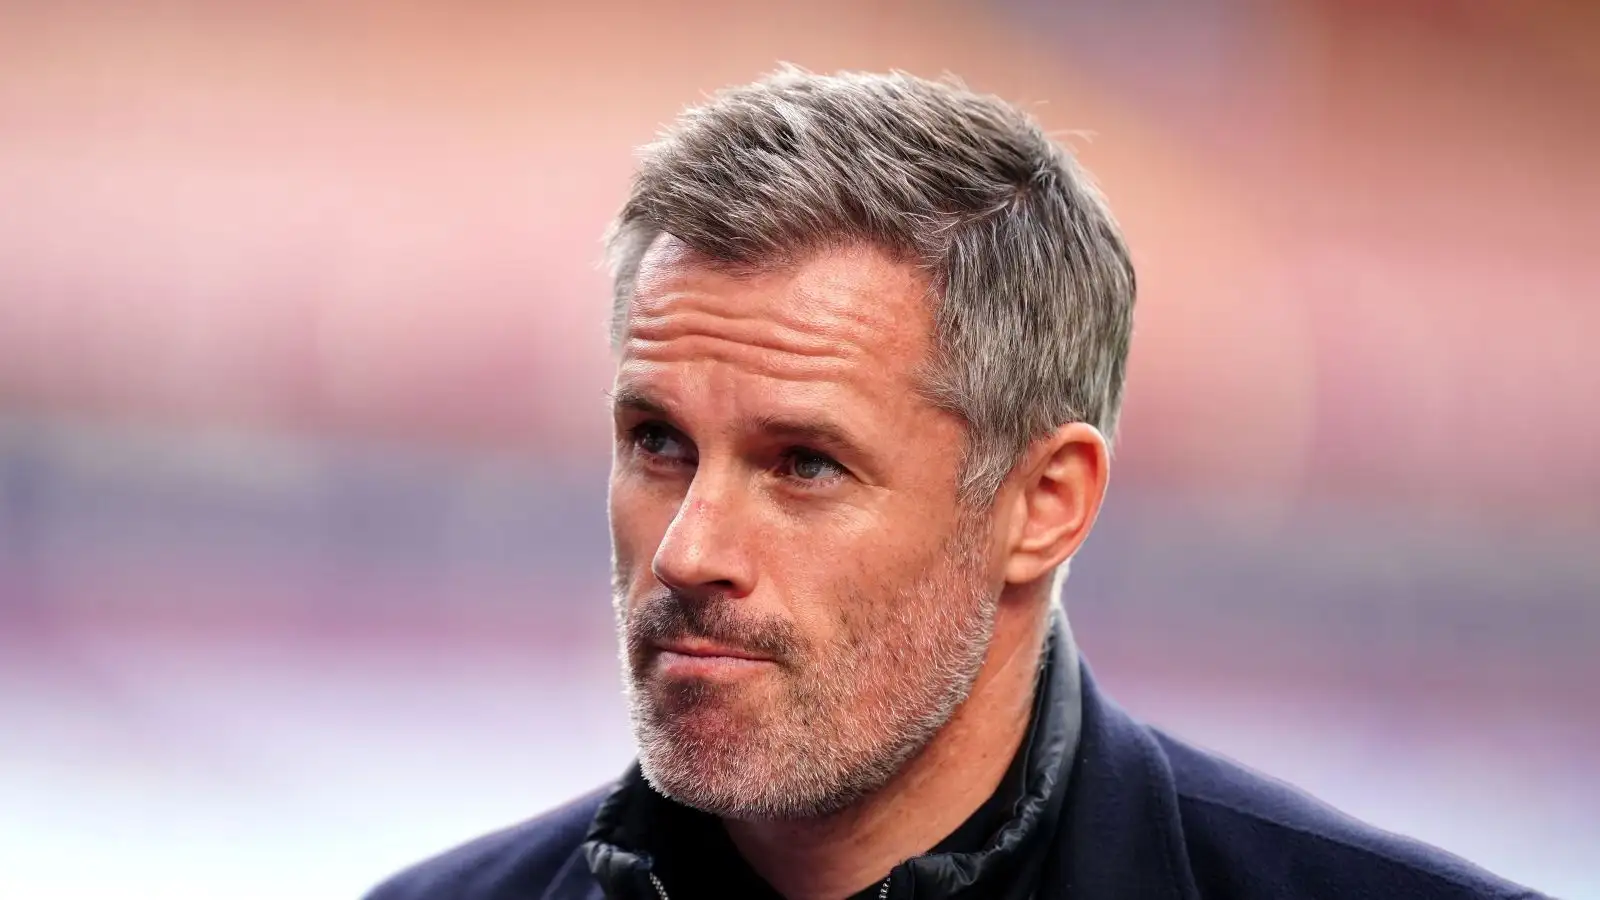 Jamie Carragher May 2022